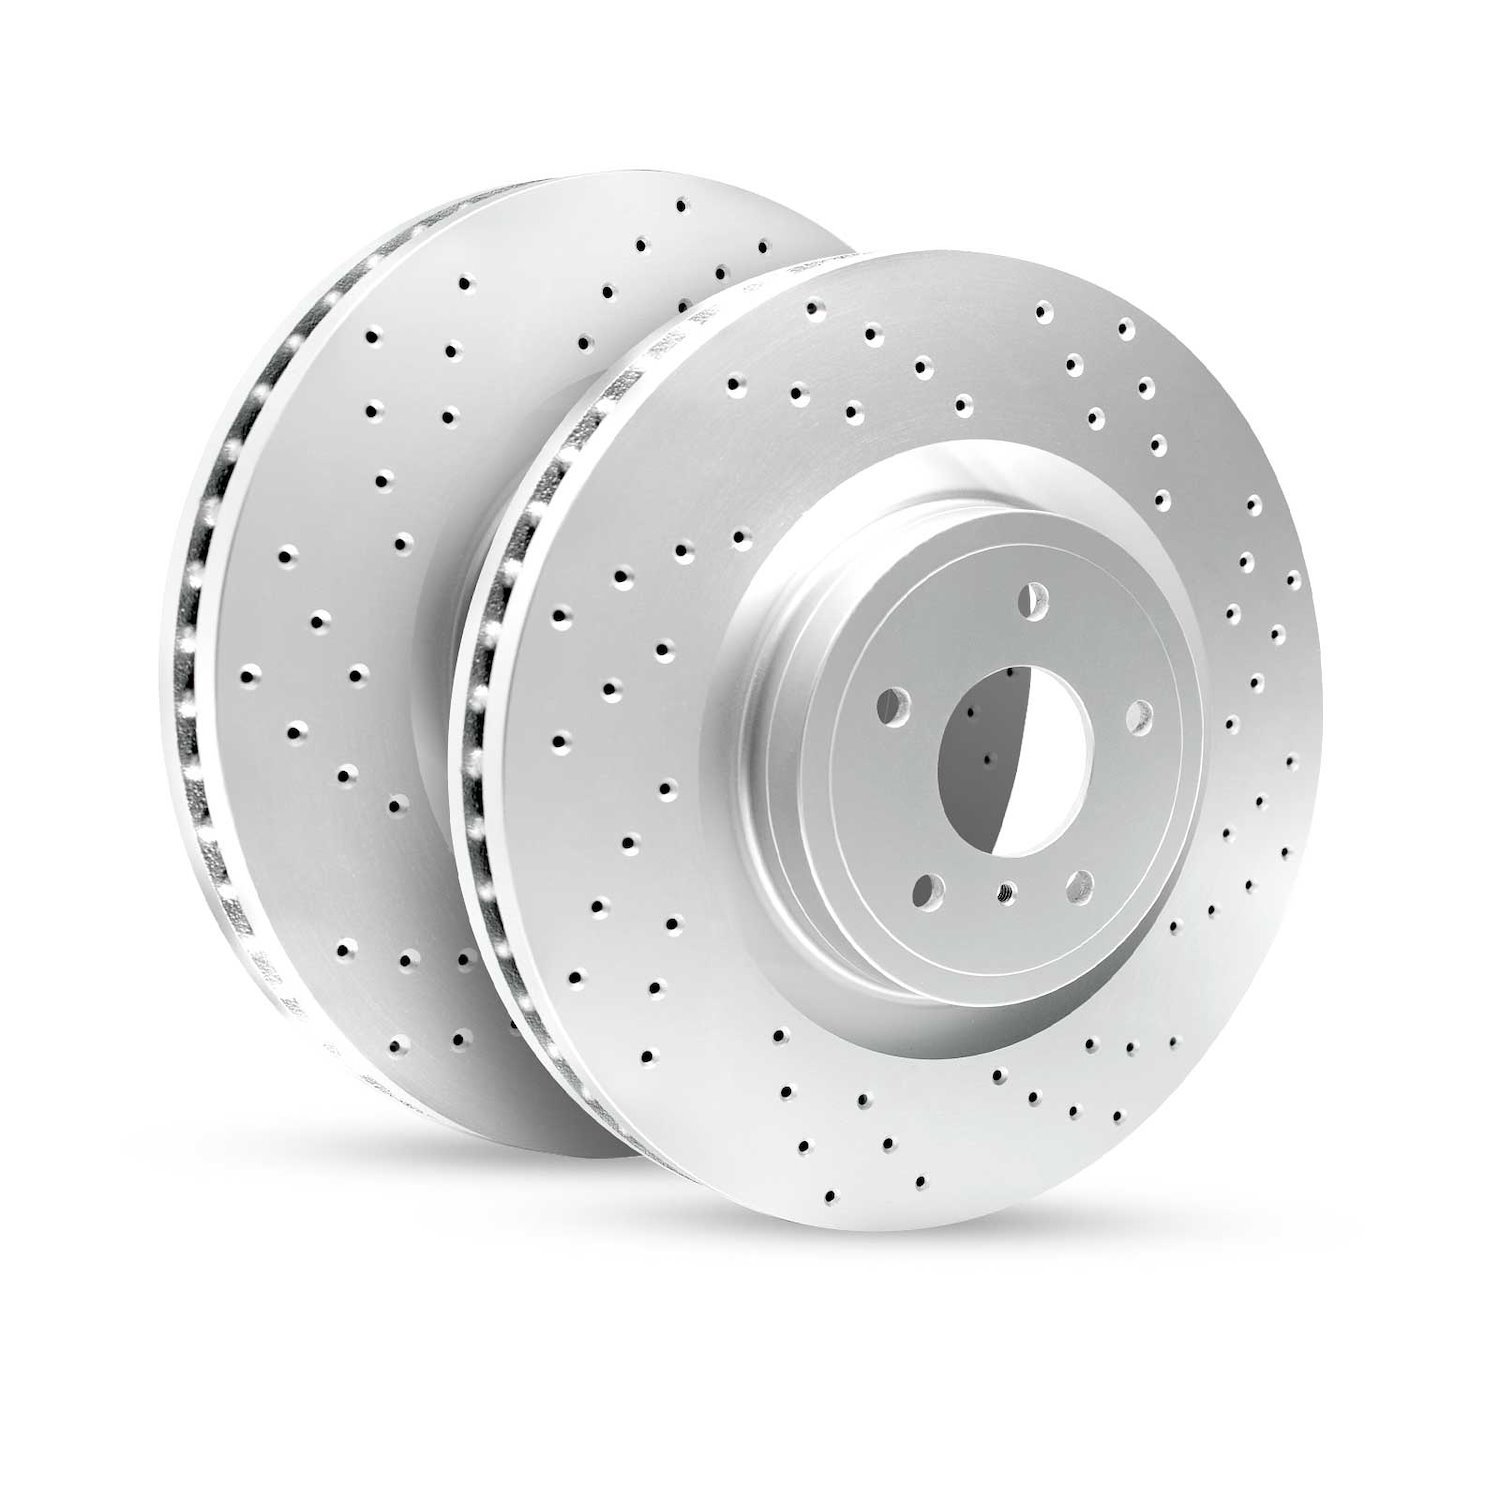 GEO-Carbon Drilled/Slotted Rotors, 2008-2016 Fits Multiple Makes/Models, Position: Front